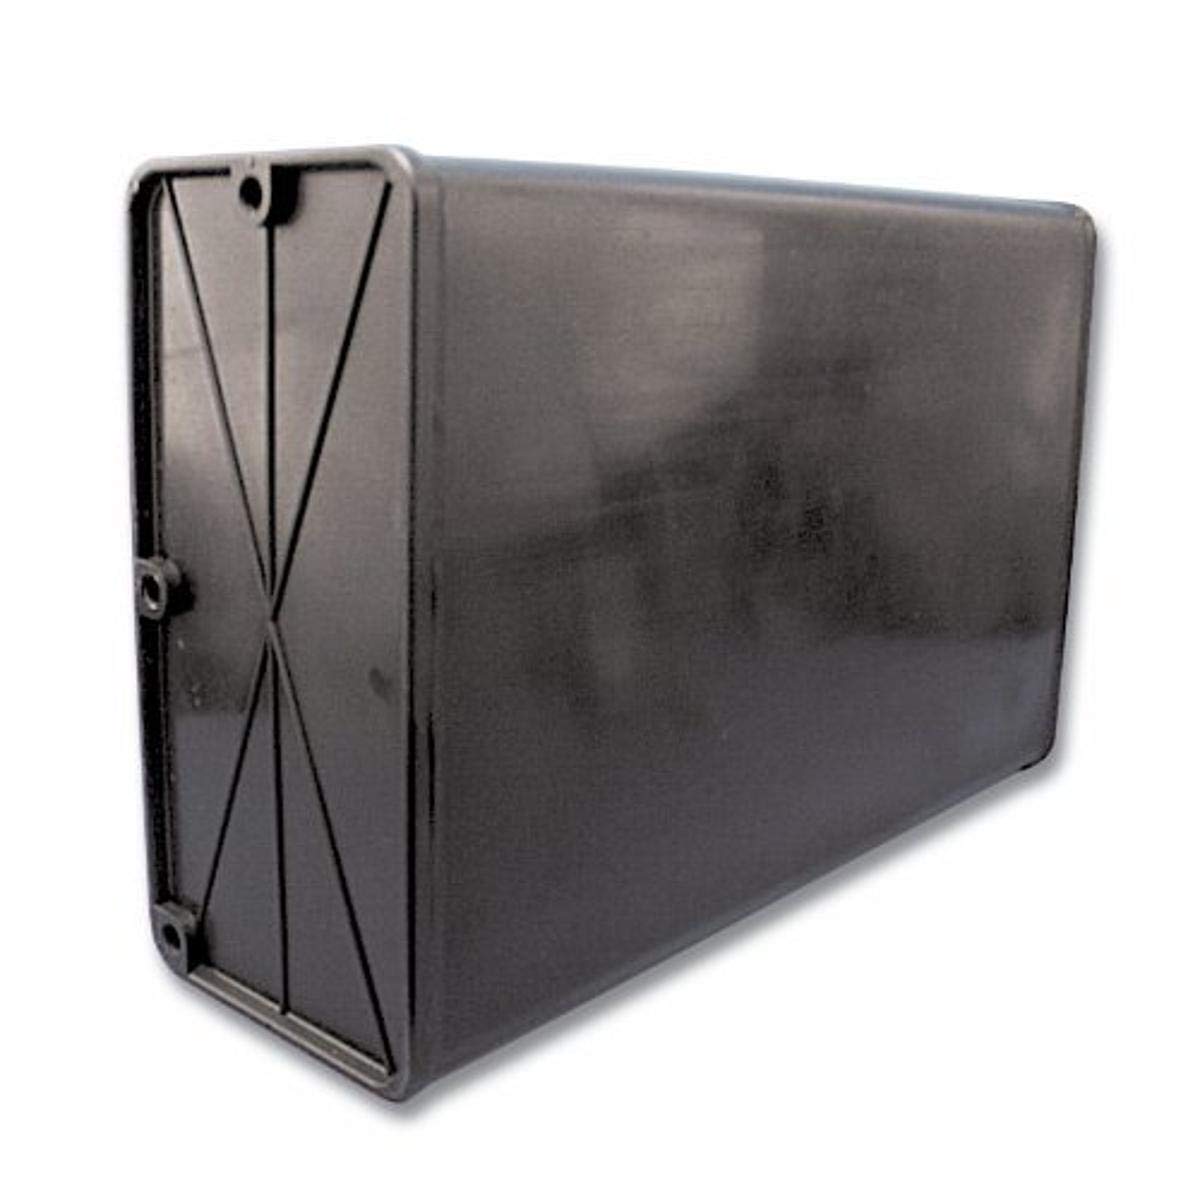 ABS WATER TANK 8IN X 16IN X 48IN 24 GALLON